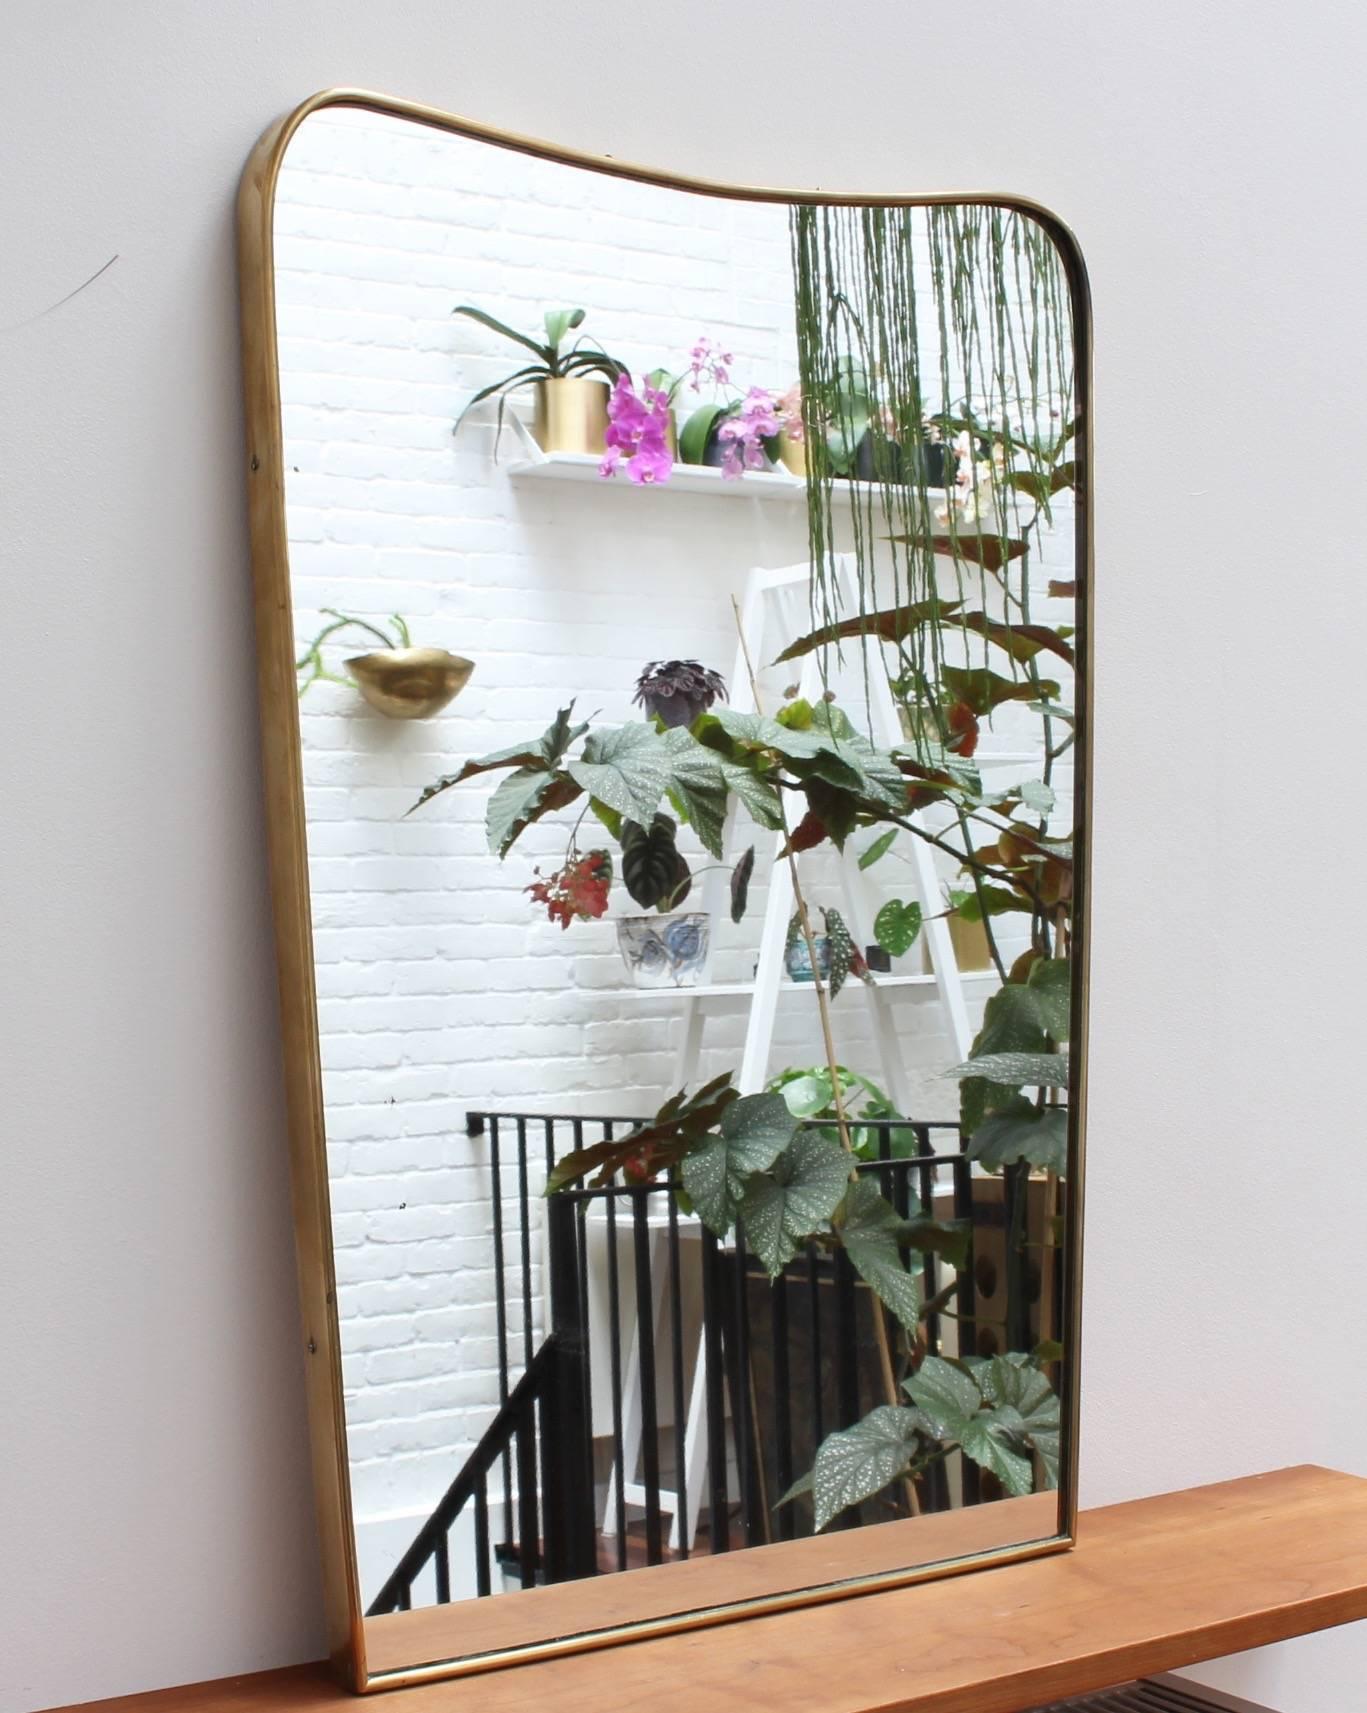 Midcentury Italian wall mirror with brass frame, circa 1950s. The mirror is in the form of a shield, or more whimsically, shaped like a slice of bread. Still classically elegant and distinctive in a modern Gio Ponti style. This piece is in very good